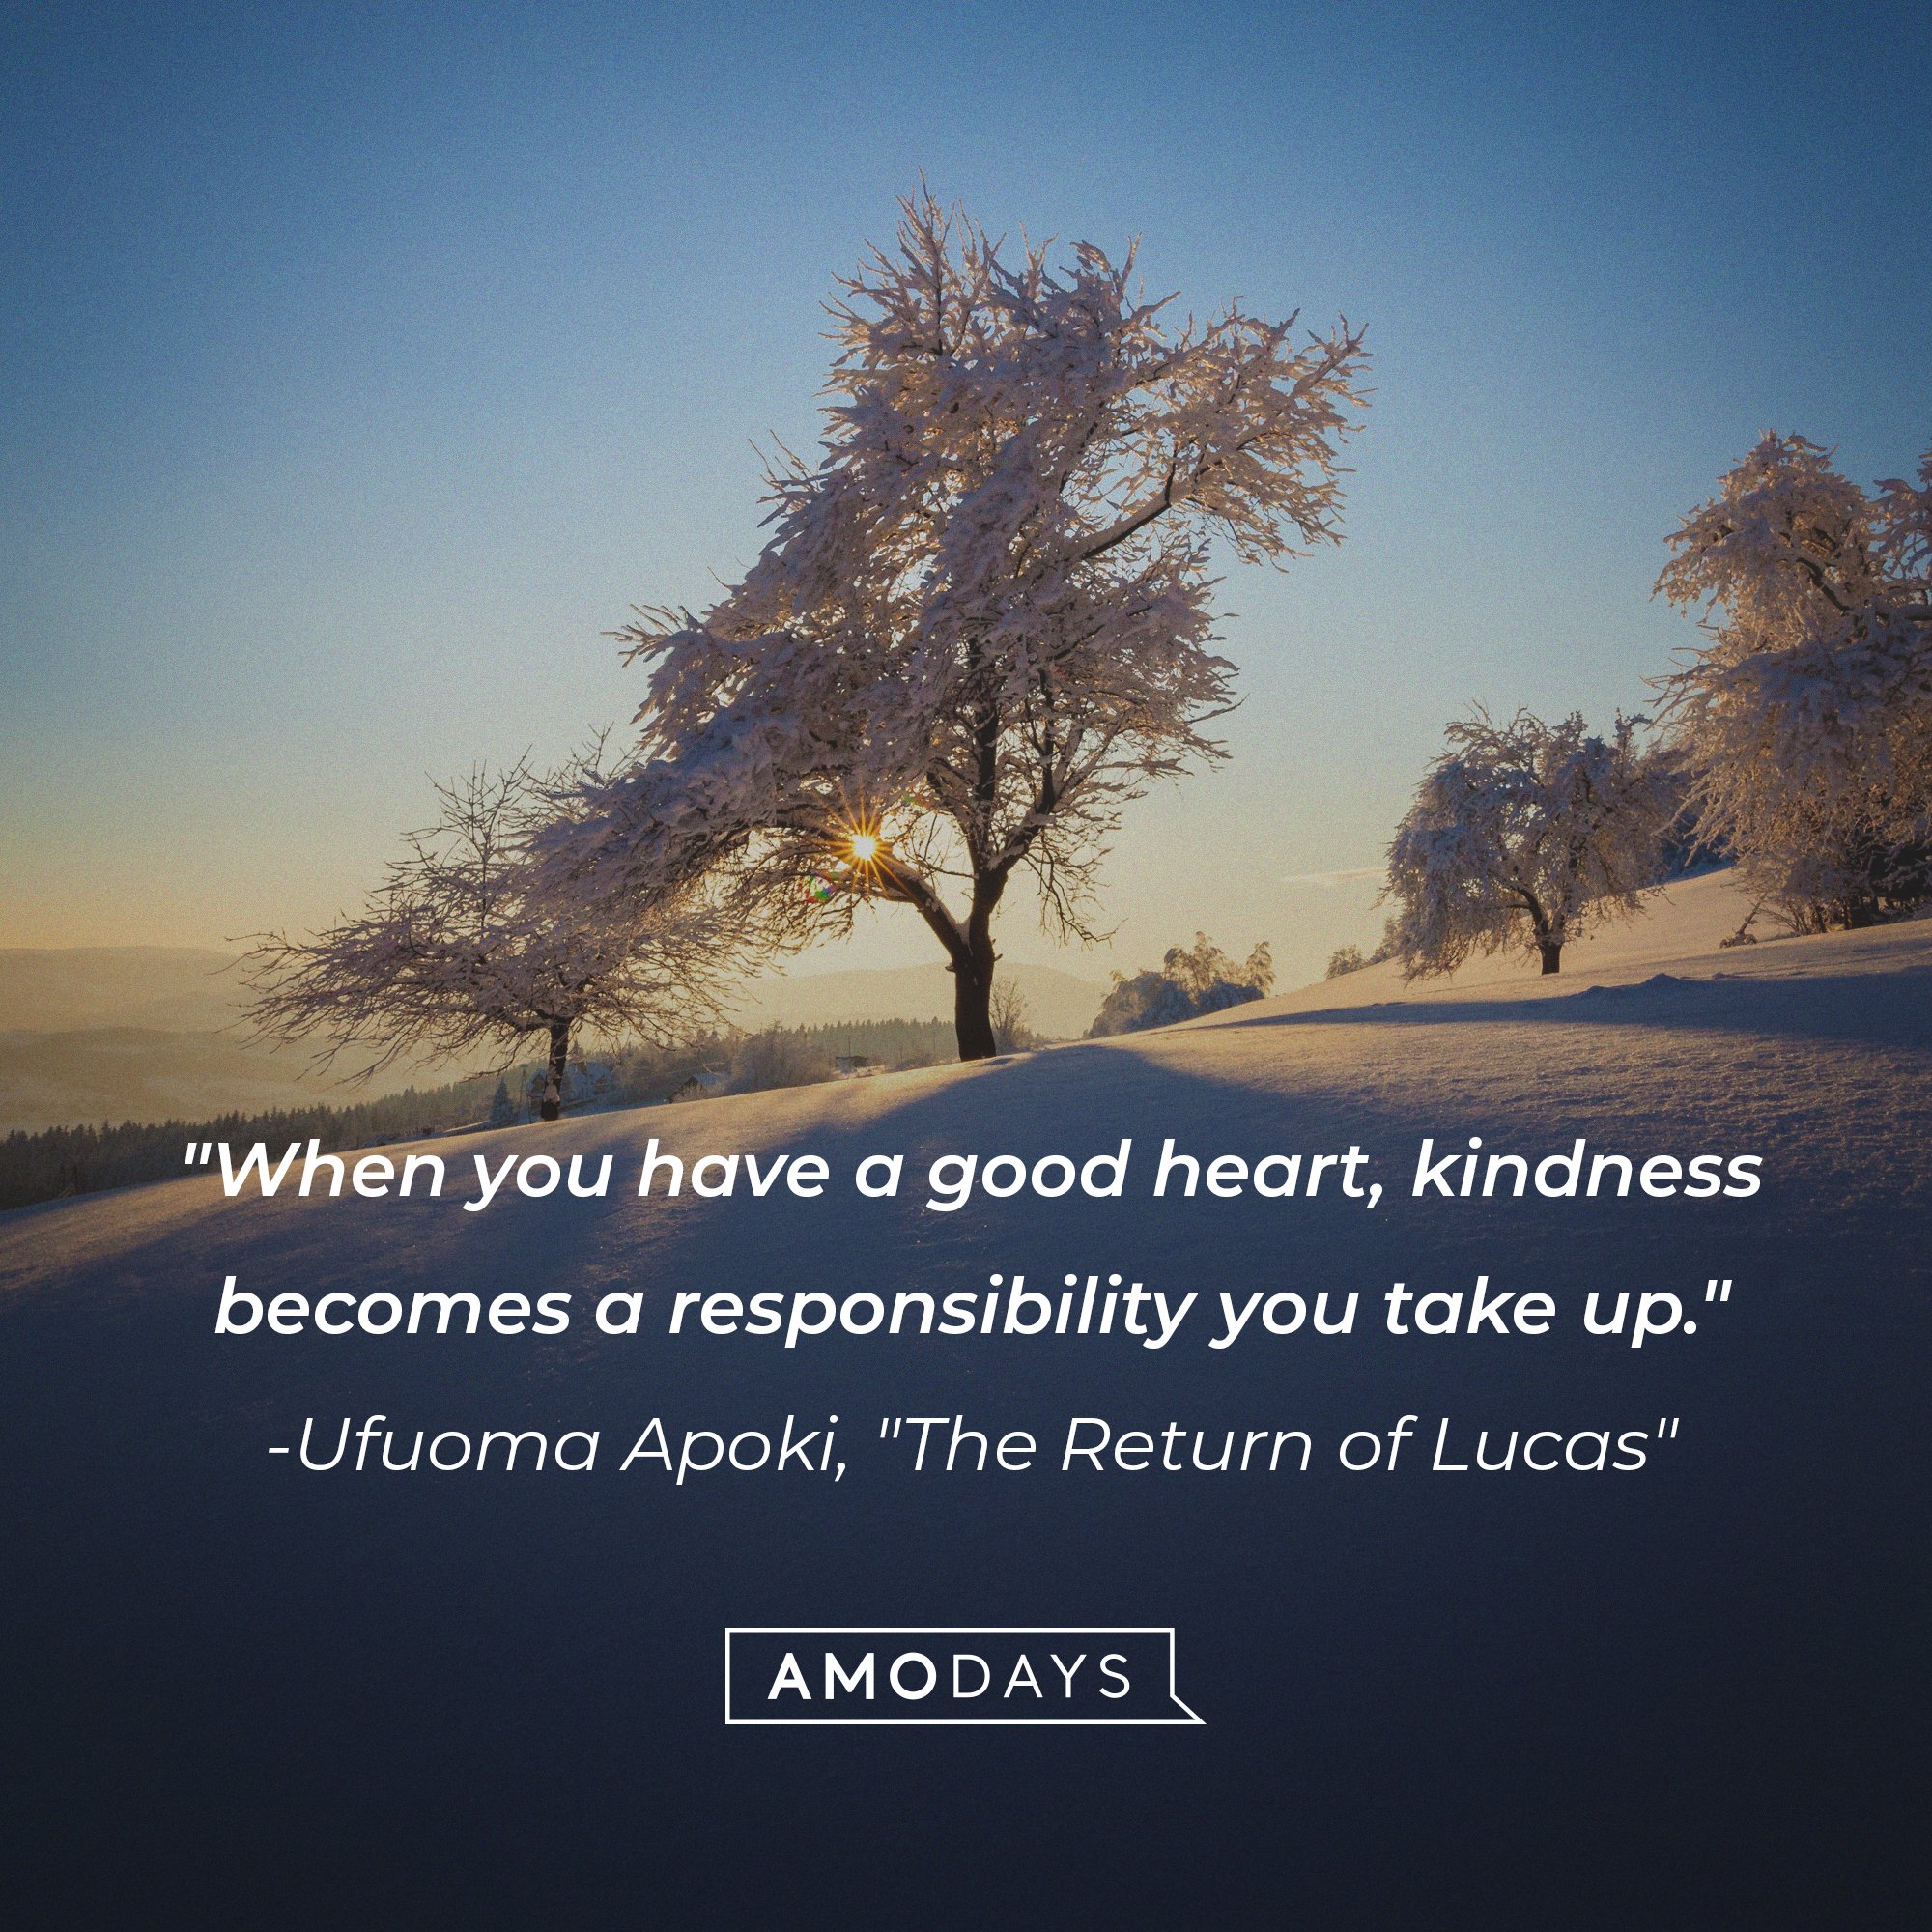 Ufuoma Apoki’s quote from"The Return of Lucas" : "When you have a good heart, kindness becomes a responsibility you take up." | Image: AmoDays